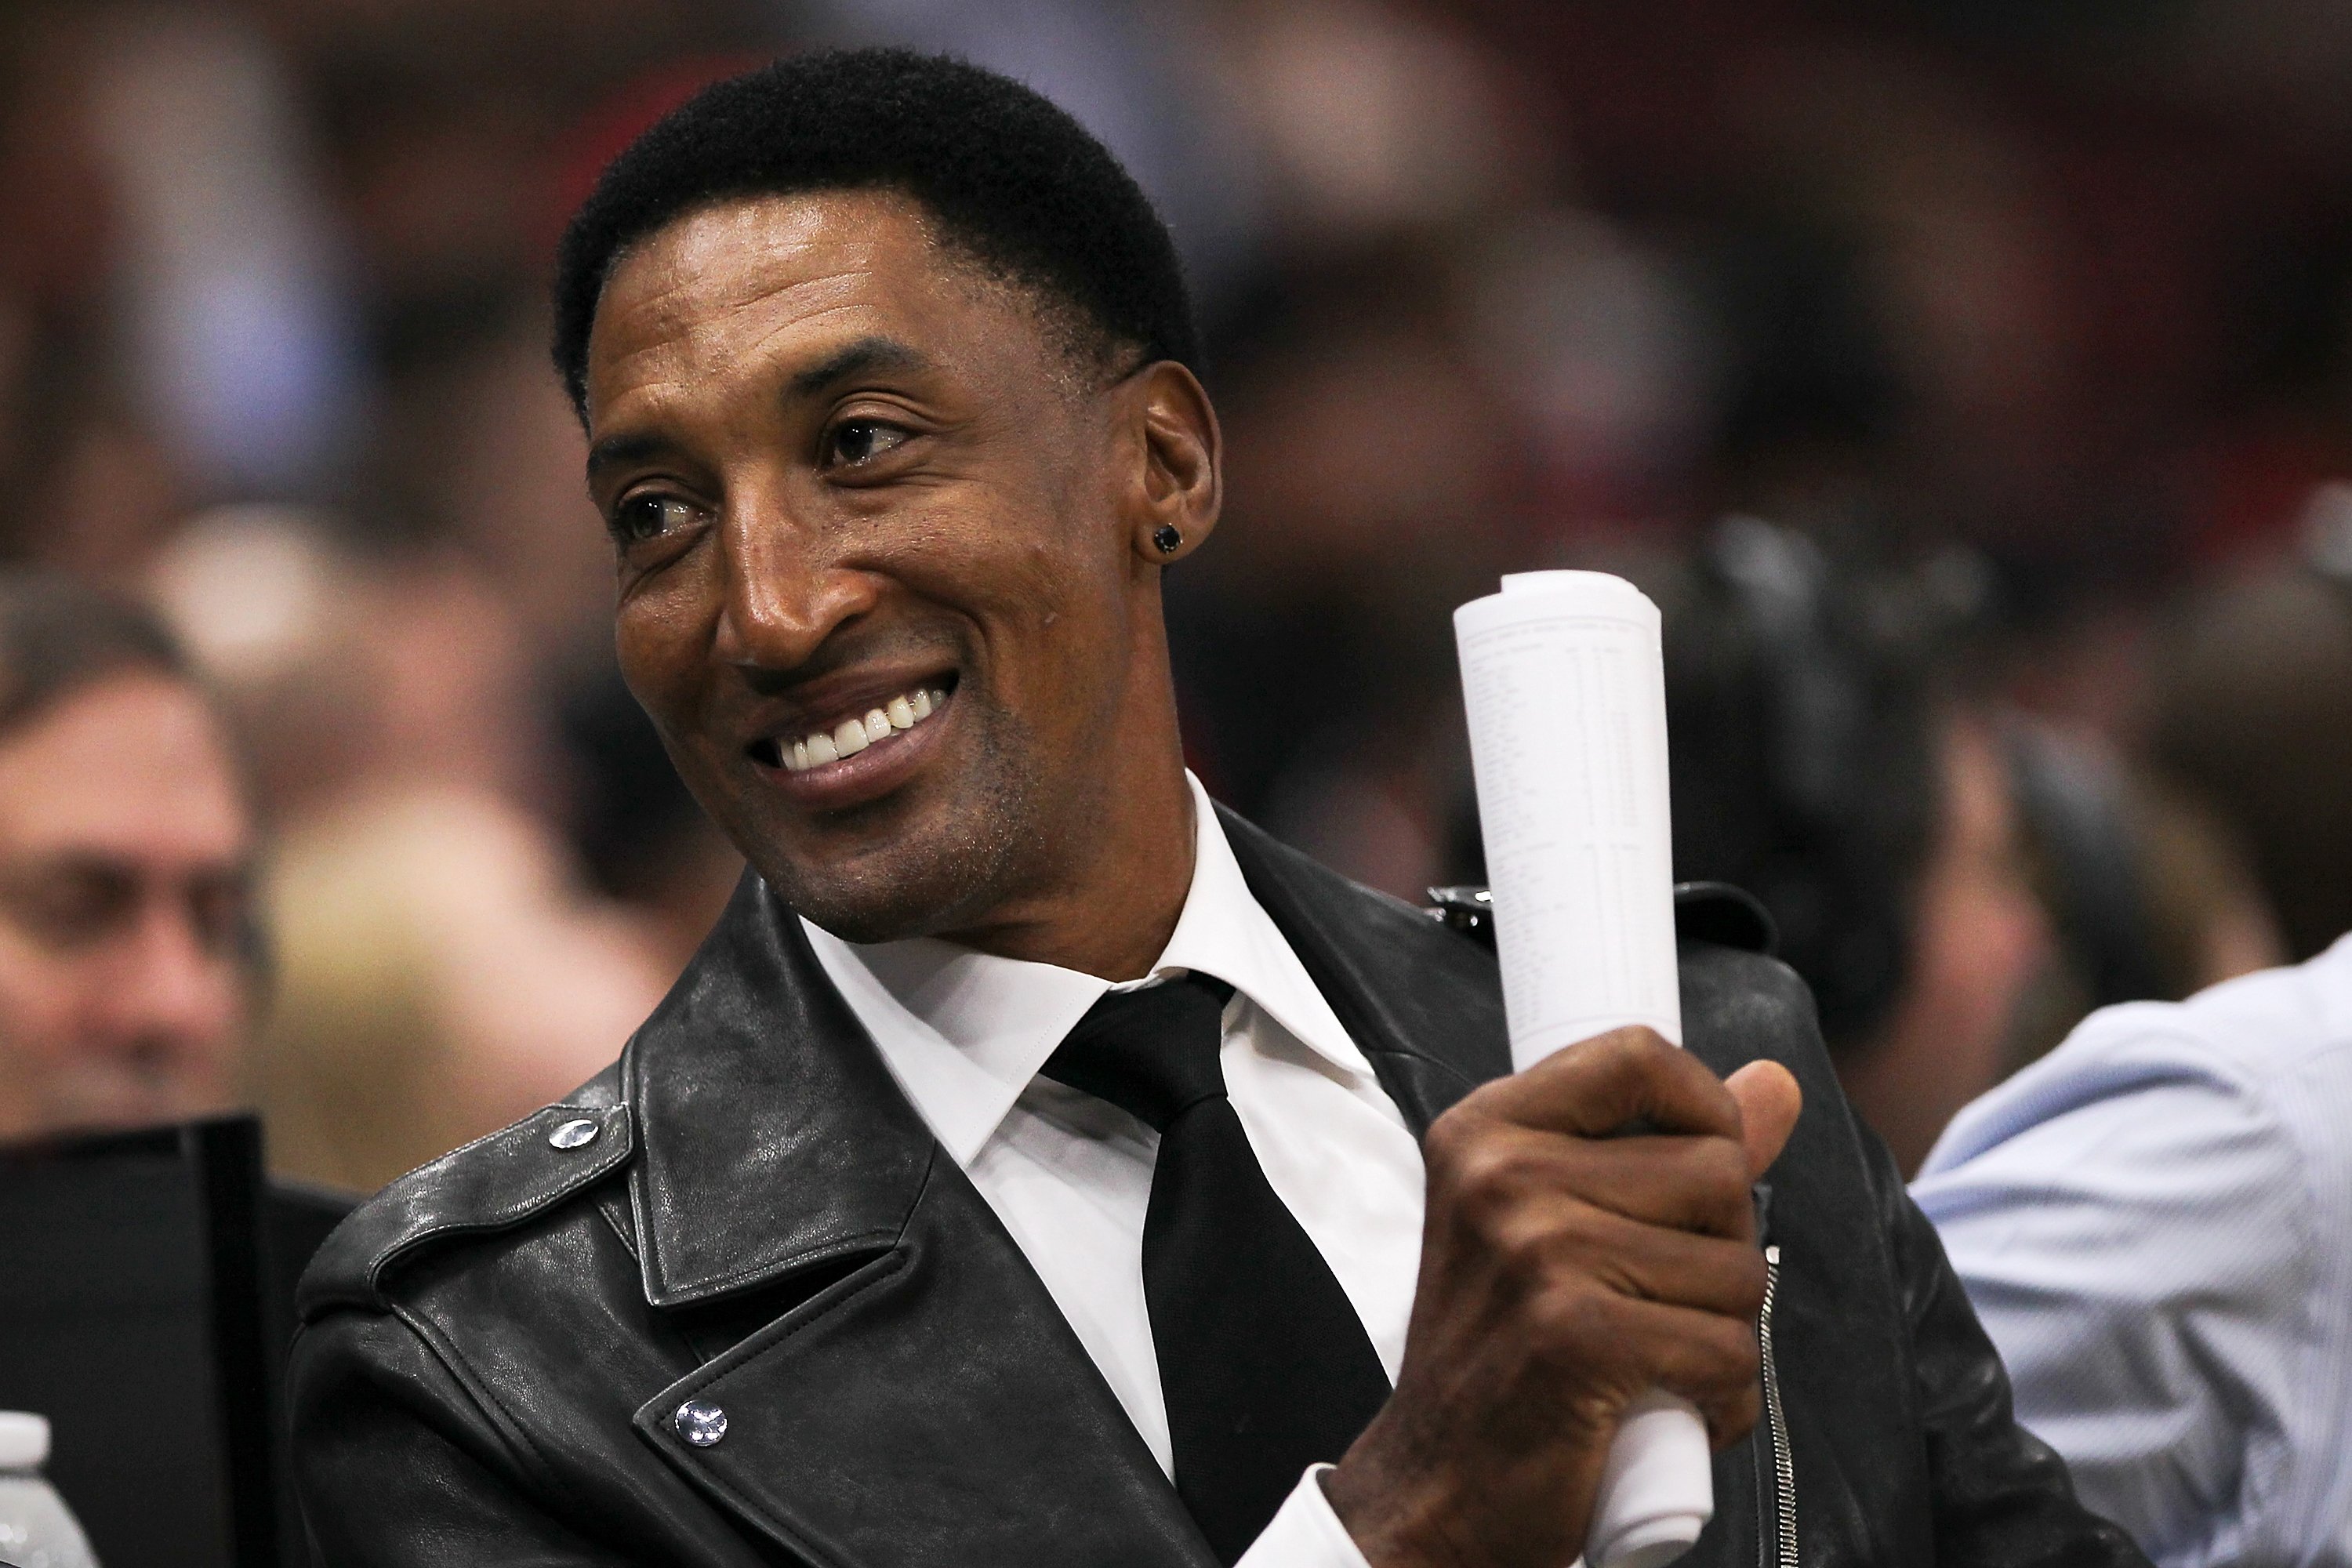 Scottie Pippen pictured at  the game between the Chicago Bulls and San Antonio Spurs at the United Center, 2017, Chicago, Illinois. | Photo: Getty Images 